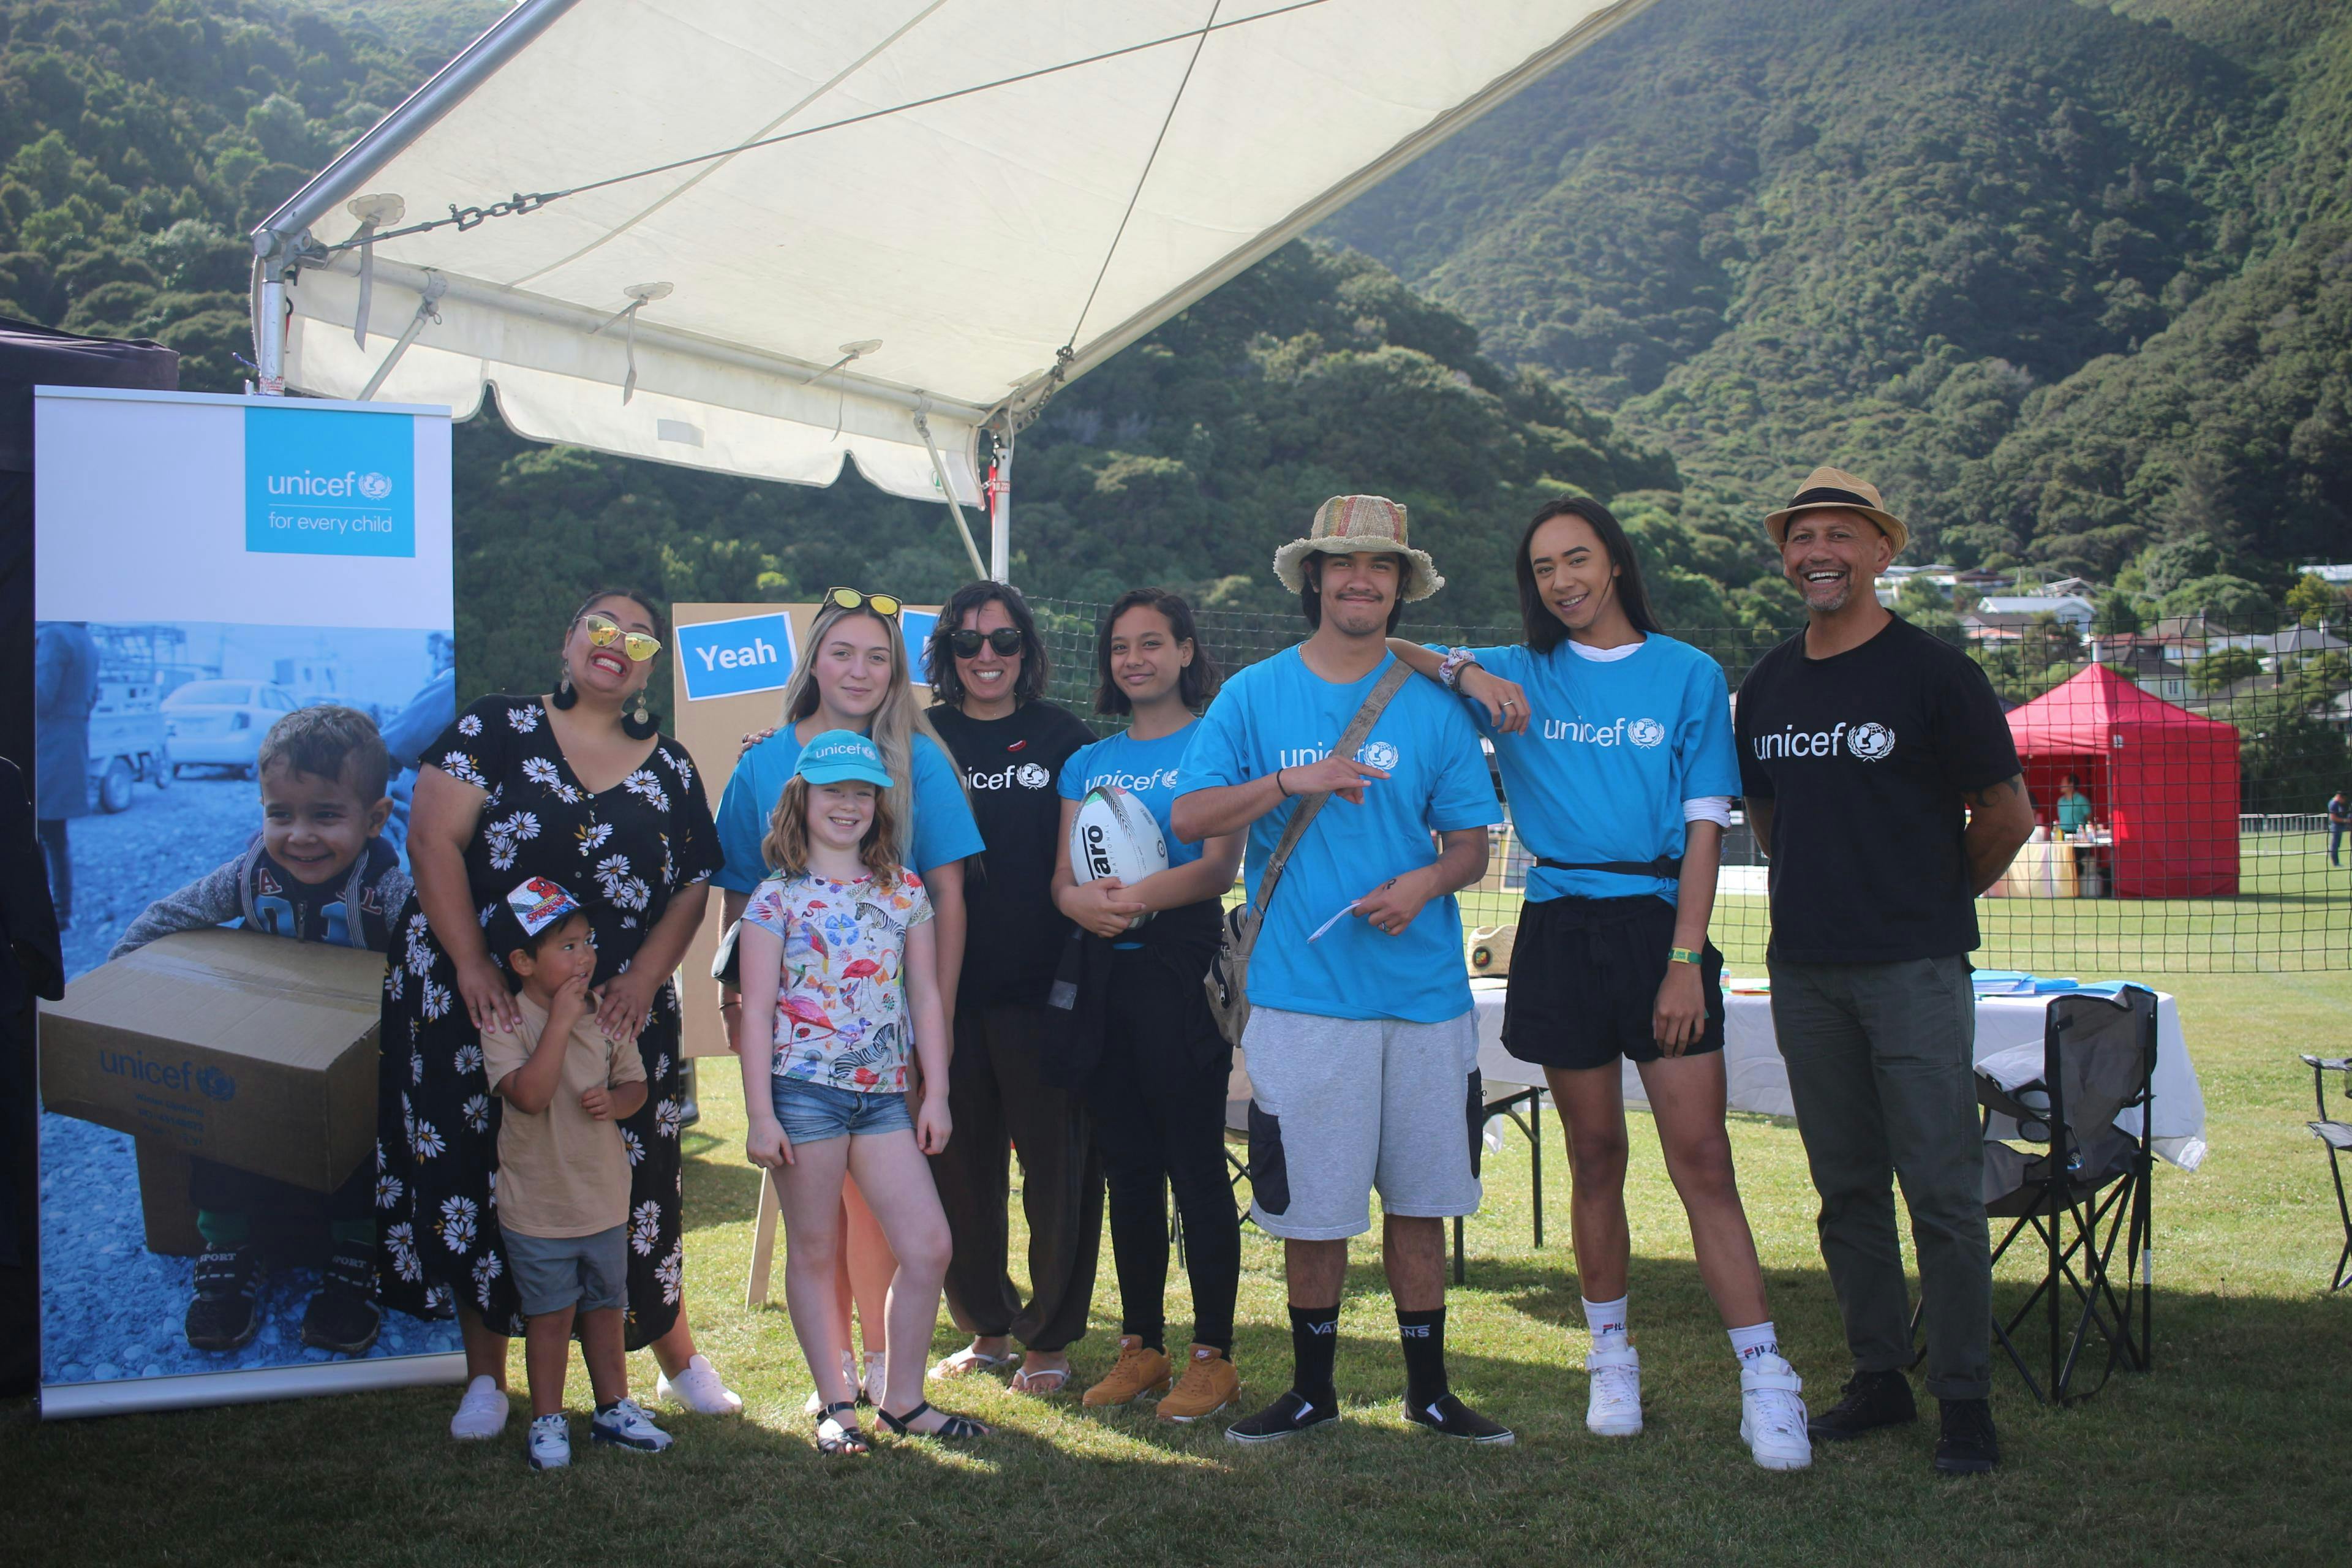 We attended the Te Rā o te Raukura Festival in Lower Hutt, to hear what local communities thought were the biggest issues affecting Kiwi kids today.